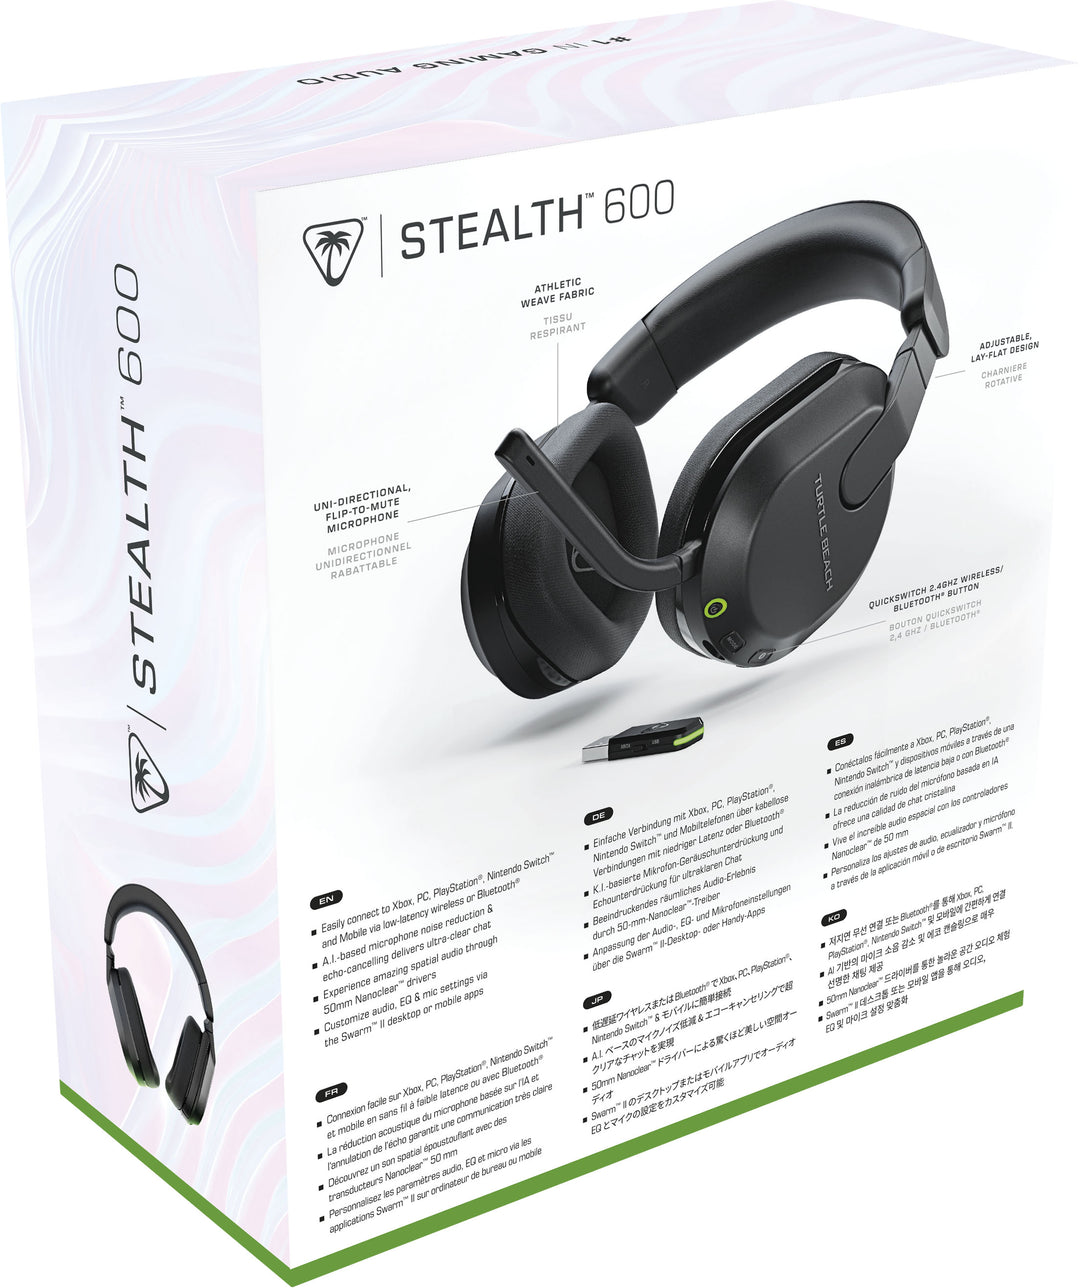 Turtle Beach Stealth 600 Wireless Gaming Headset for Xbox Series X|S, PC, PS5, PS4, Nintendo Switch with 80-Hr Battery - Black_12